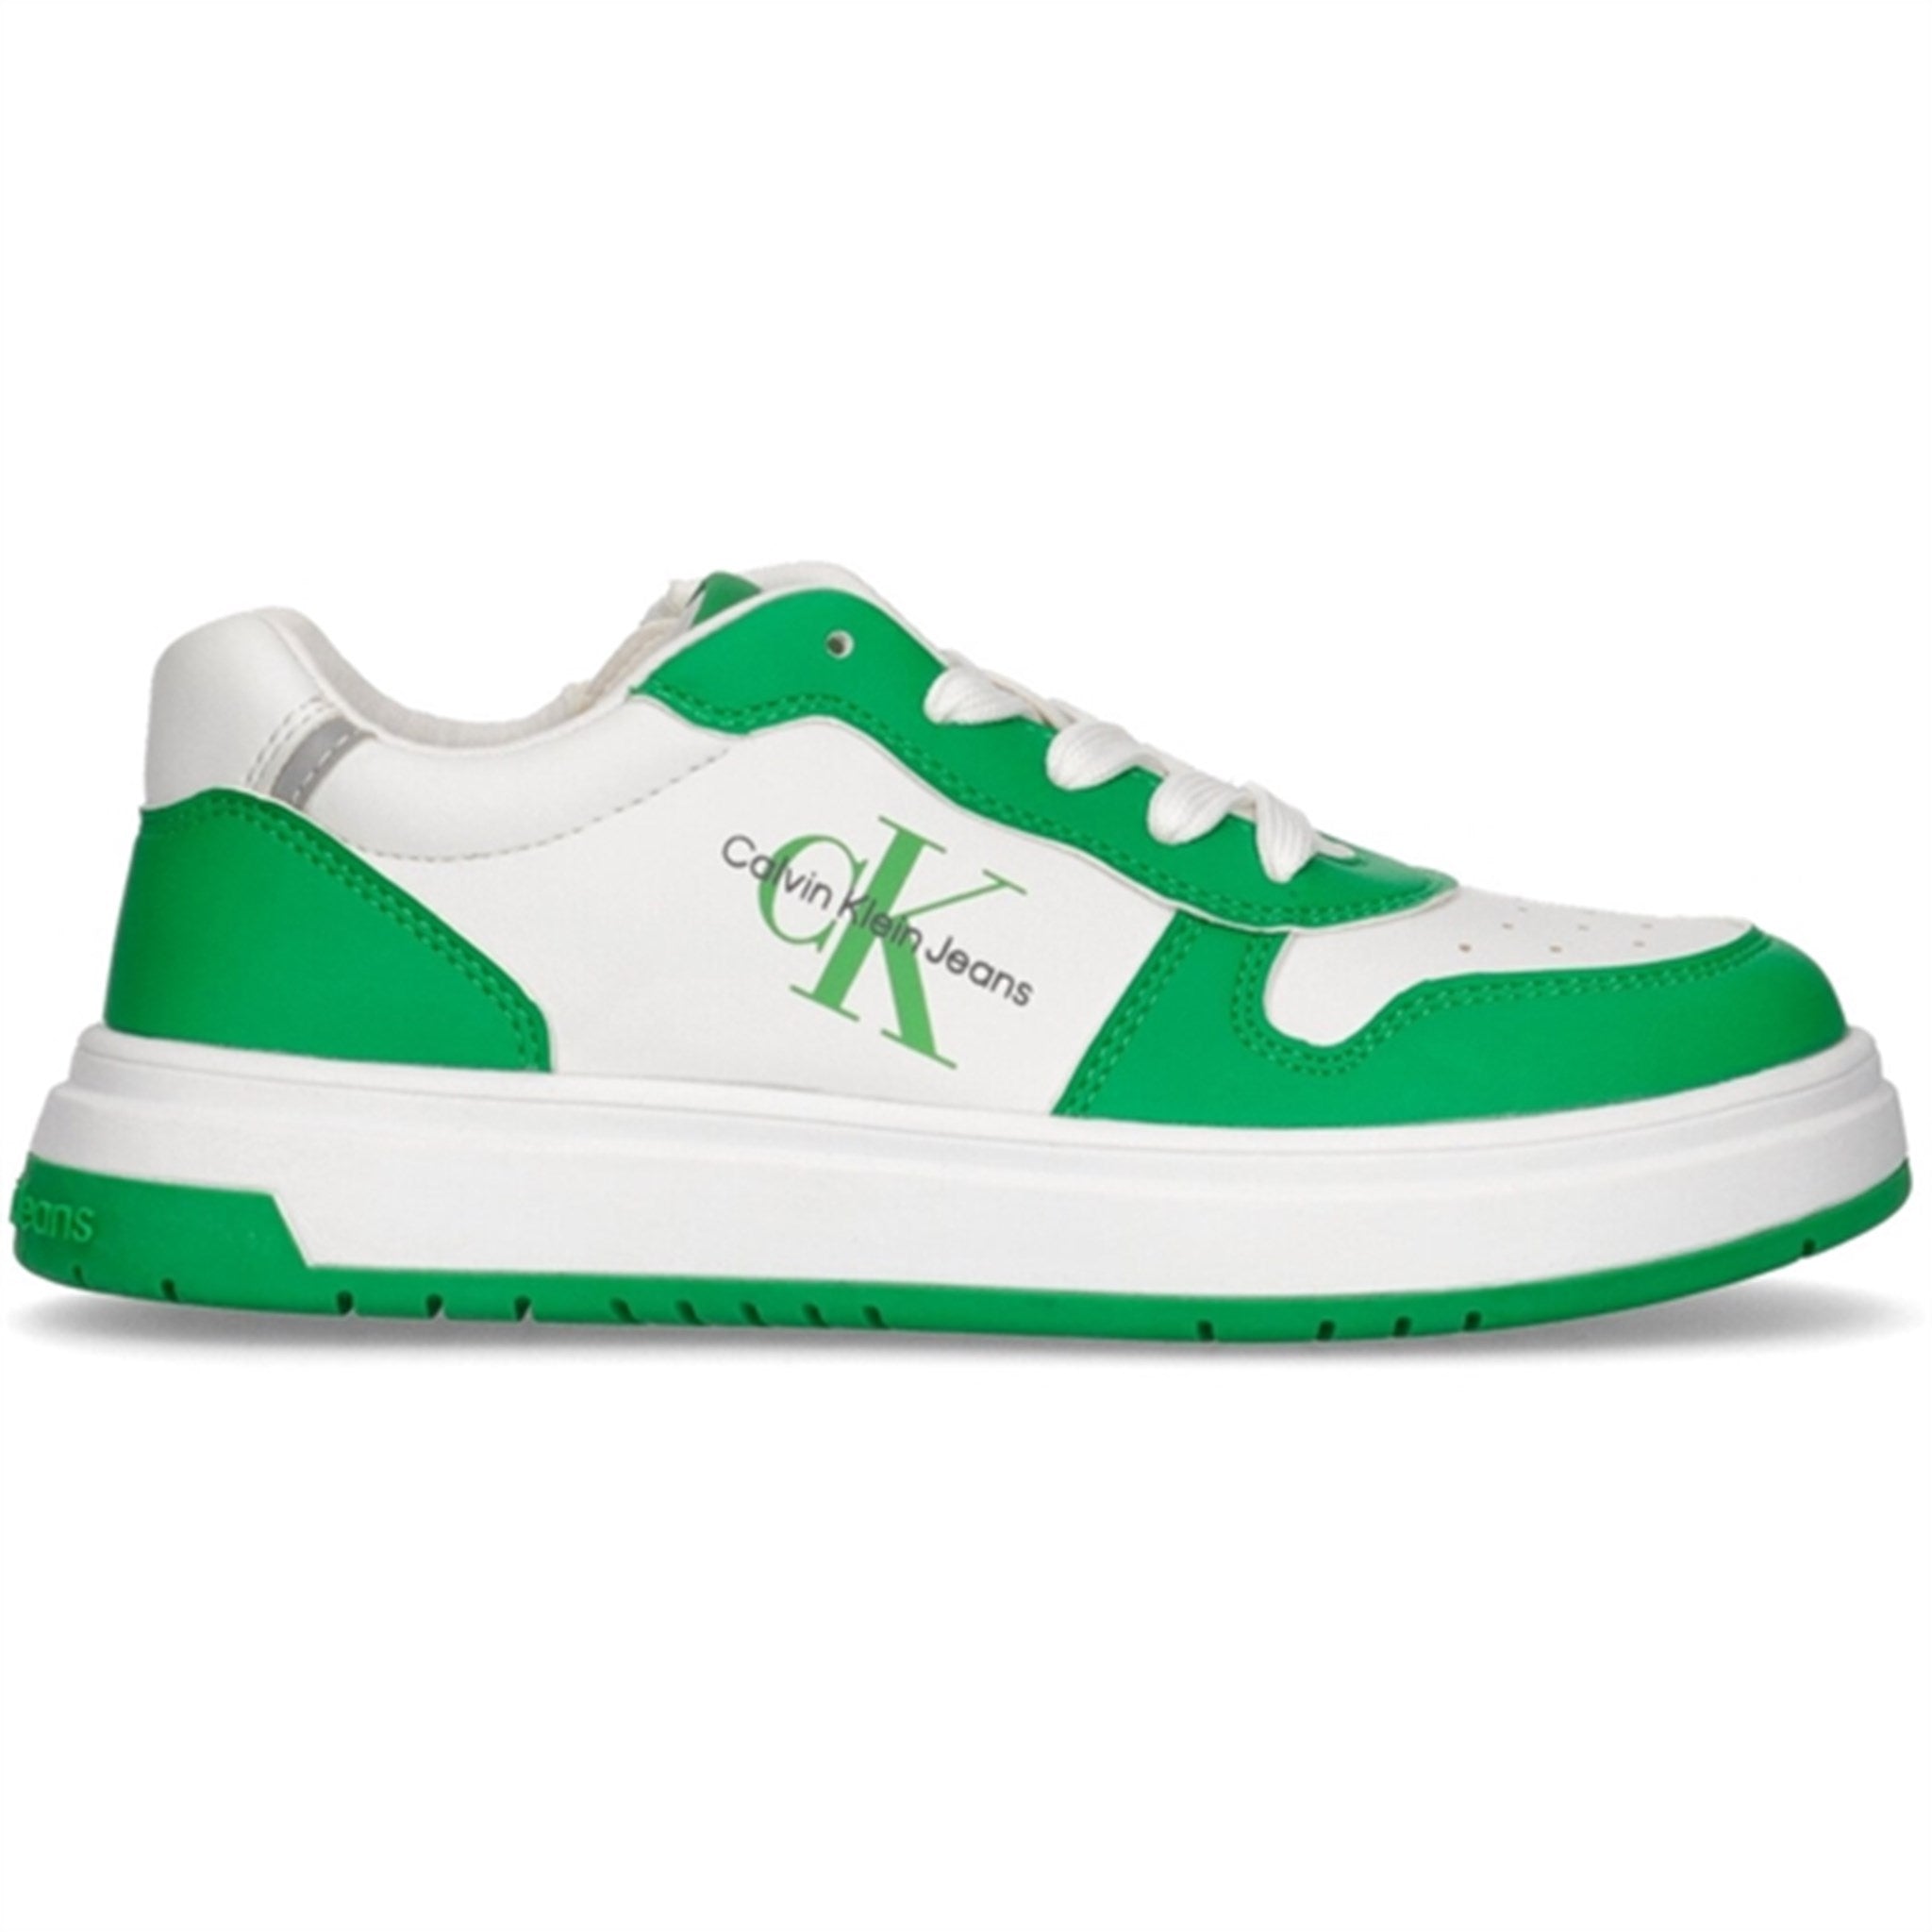 Calvin Klein Low Cut Lace-Up Sneakers Green/White 3